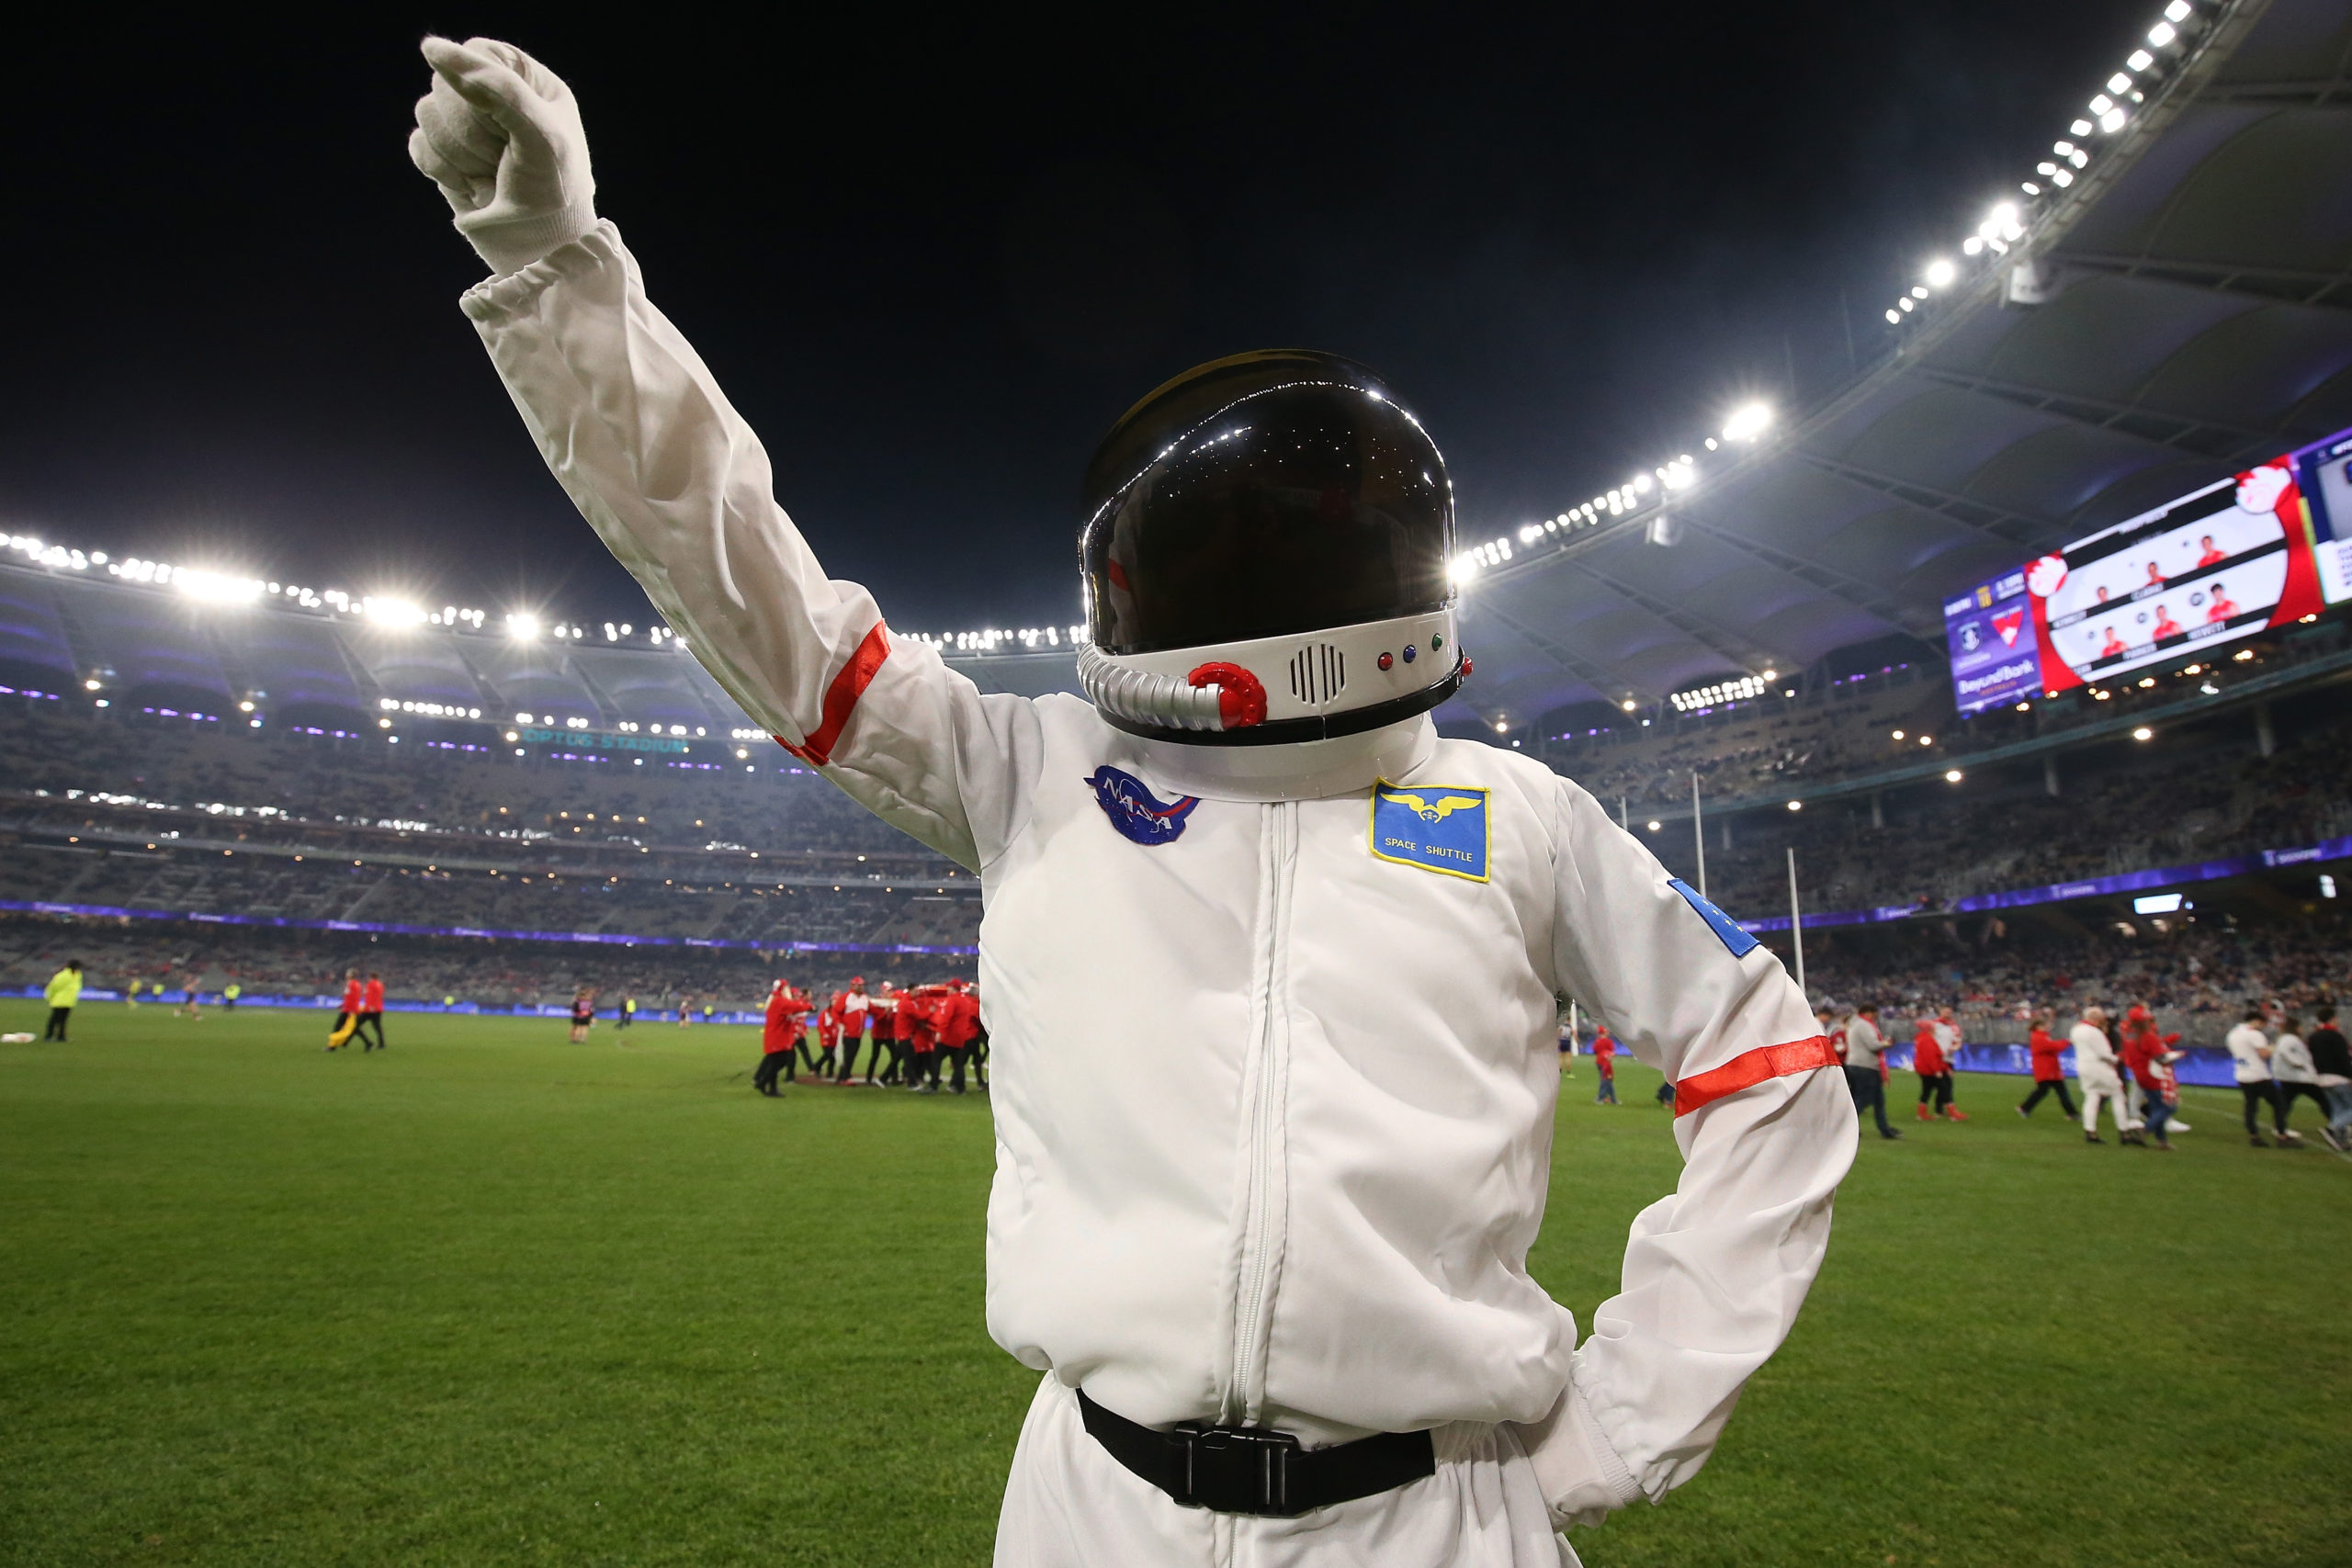 PERTH, AUSTRALIA - JULY 20: A mascot dressed an astronaut poses to commemorate the Apollo 11 moon landing during the round 18 AFL match between the Fremantle Dockers and the Sydney Swans at Optus Stadium on July 20, 2019 in Perth, Australia. (Photo by Paul Kane/Getty Images)